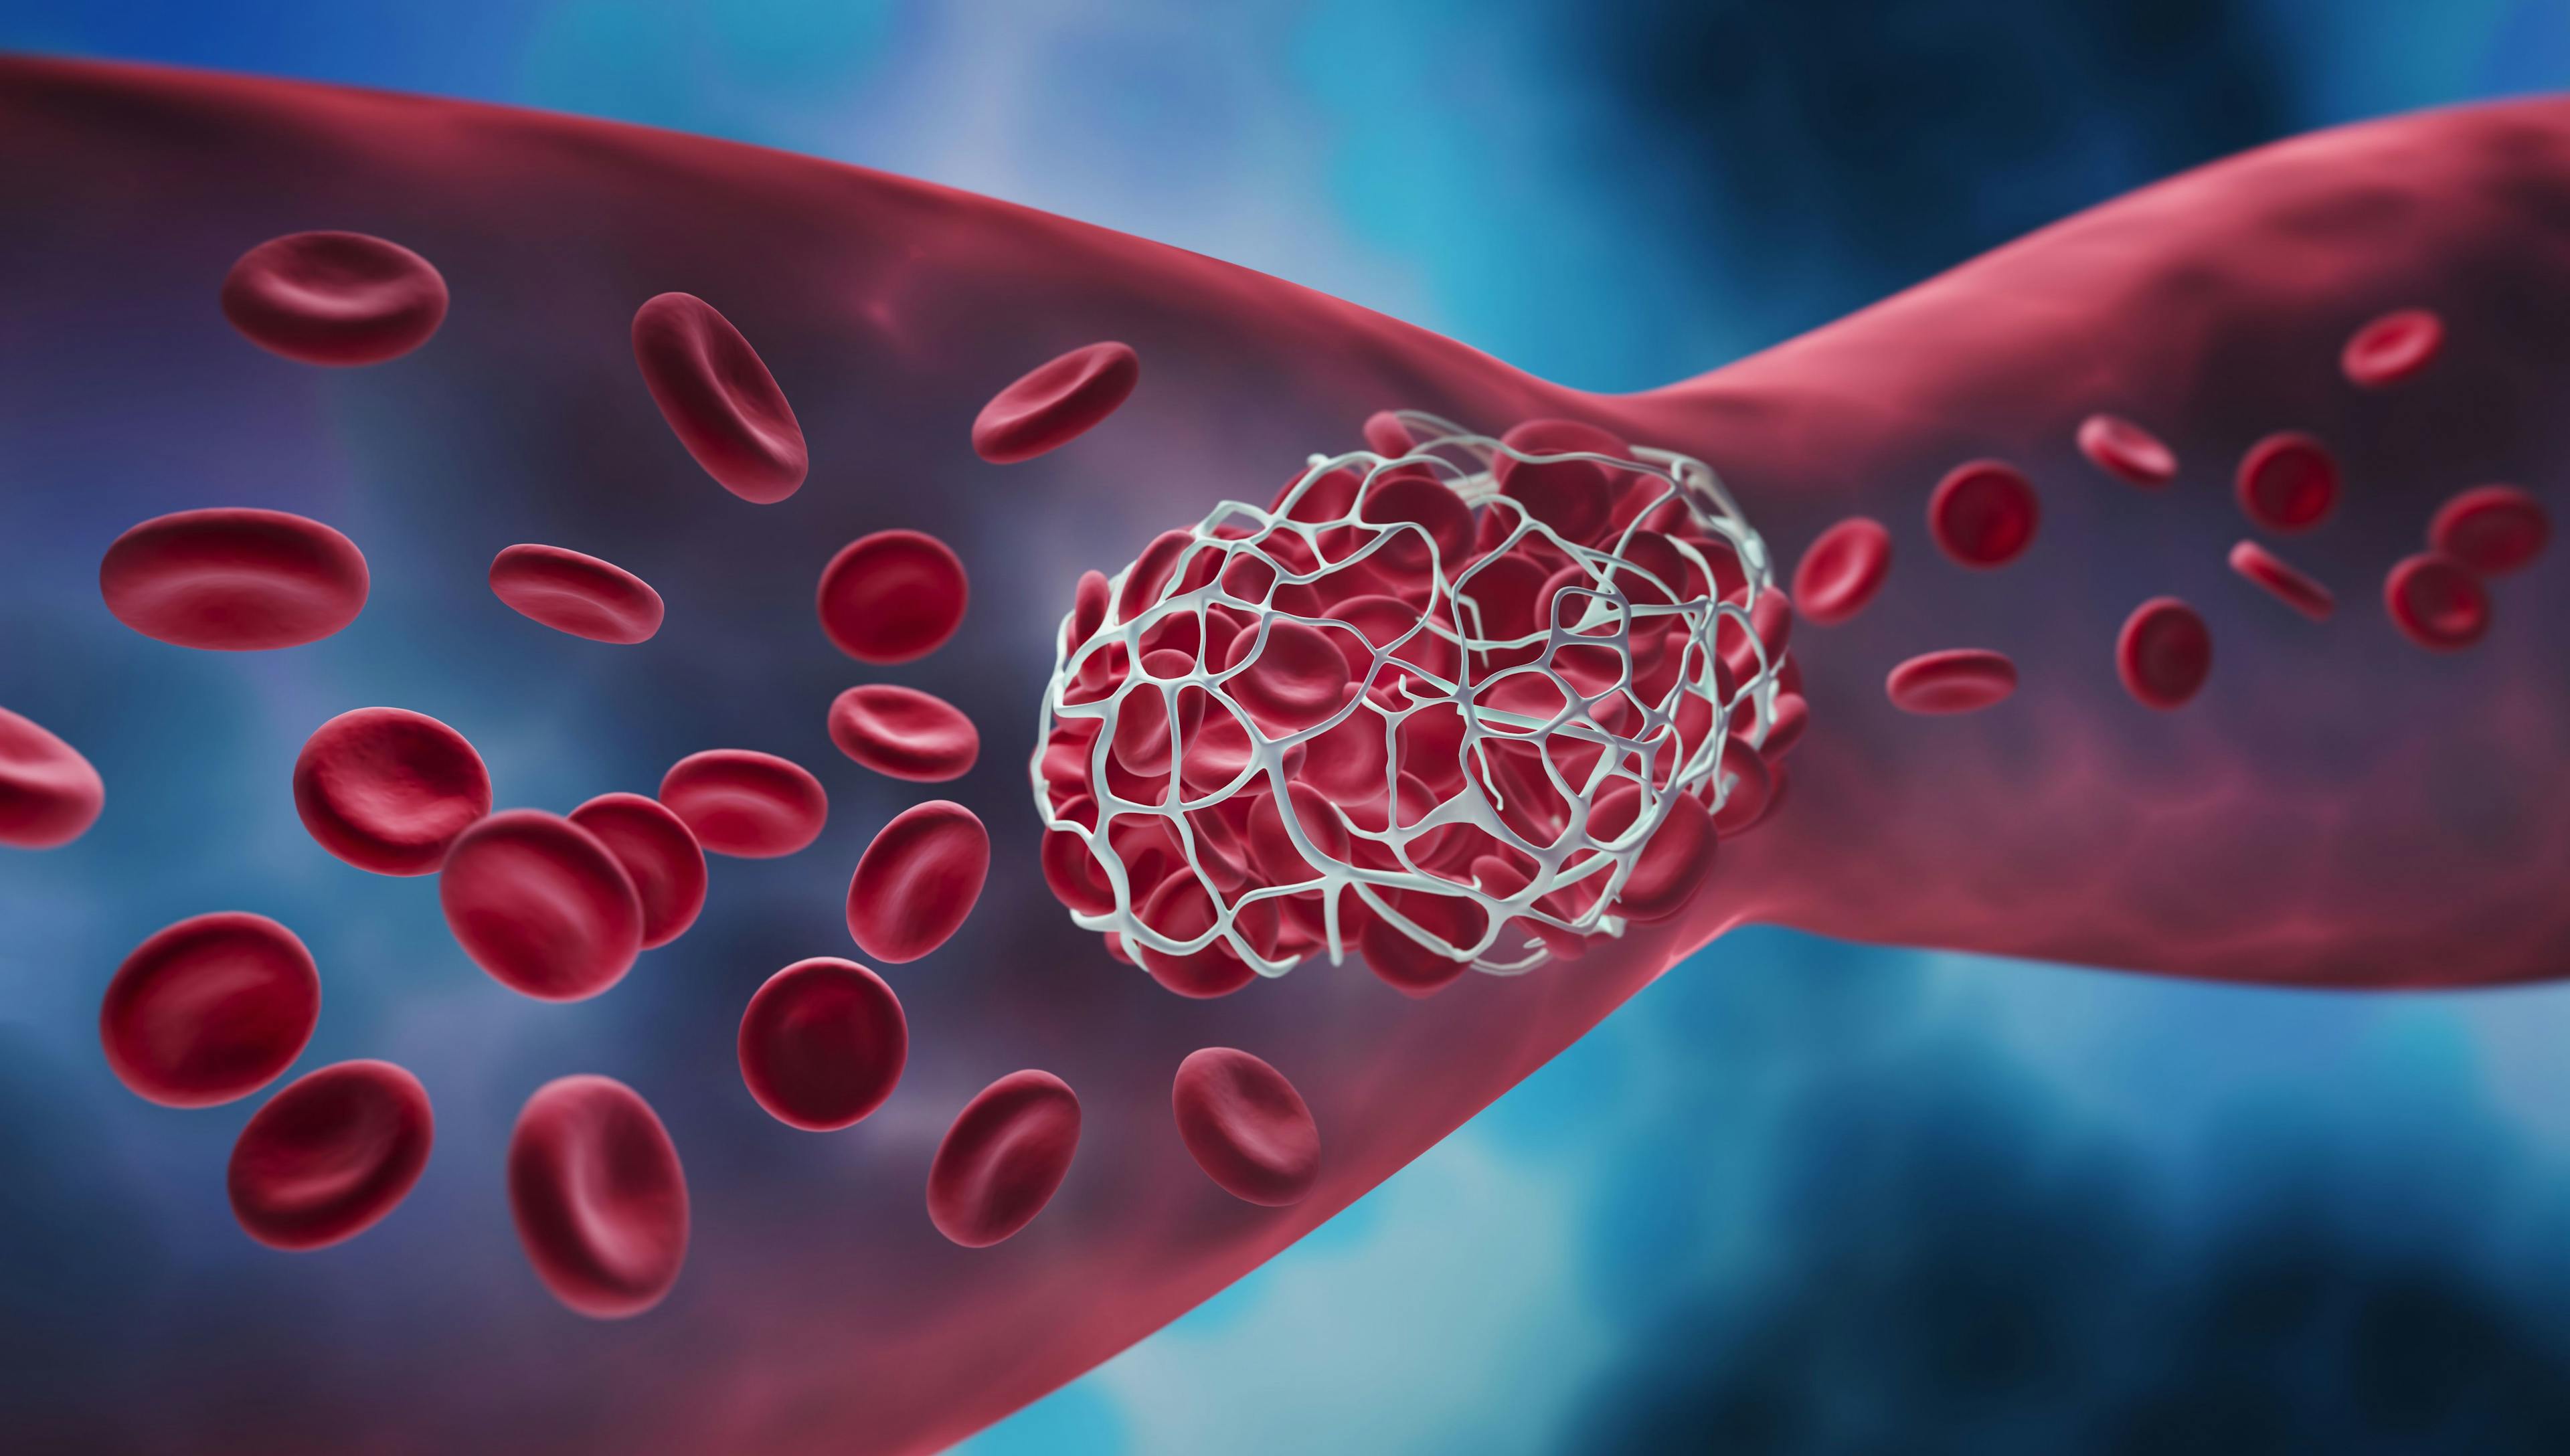 Study: Thrombotic Events Increase Mortality Risk for People With Polycythemia Vera or Essential Thrombocythemia